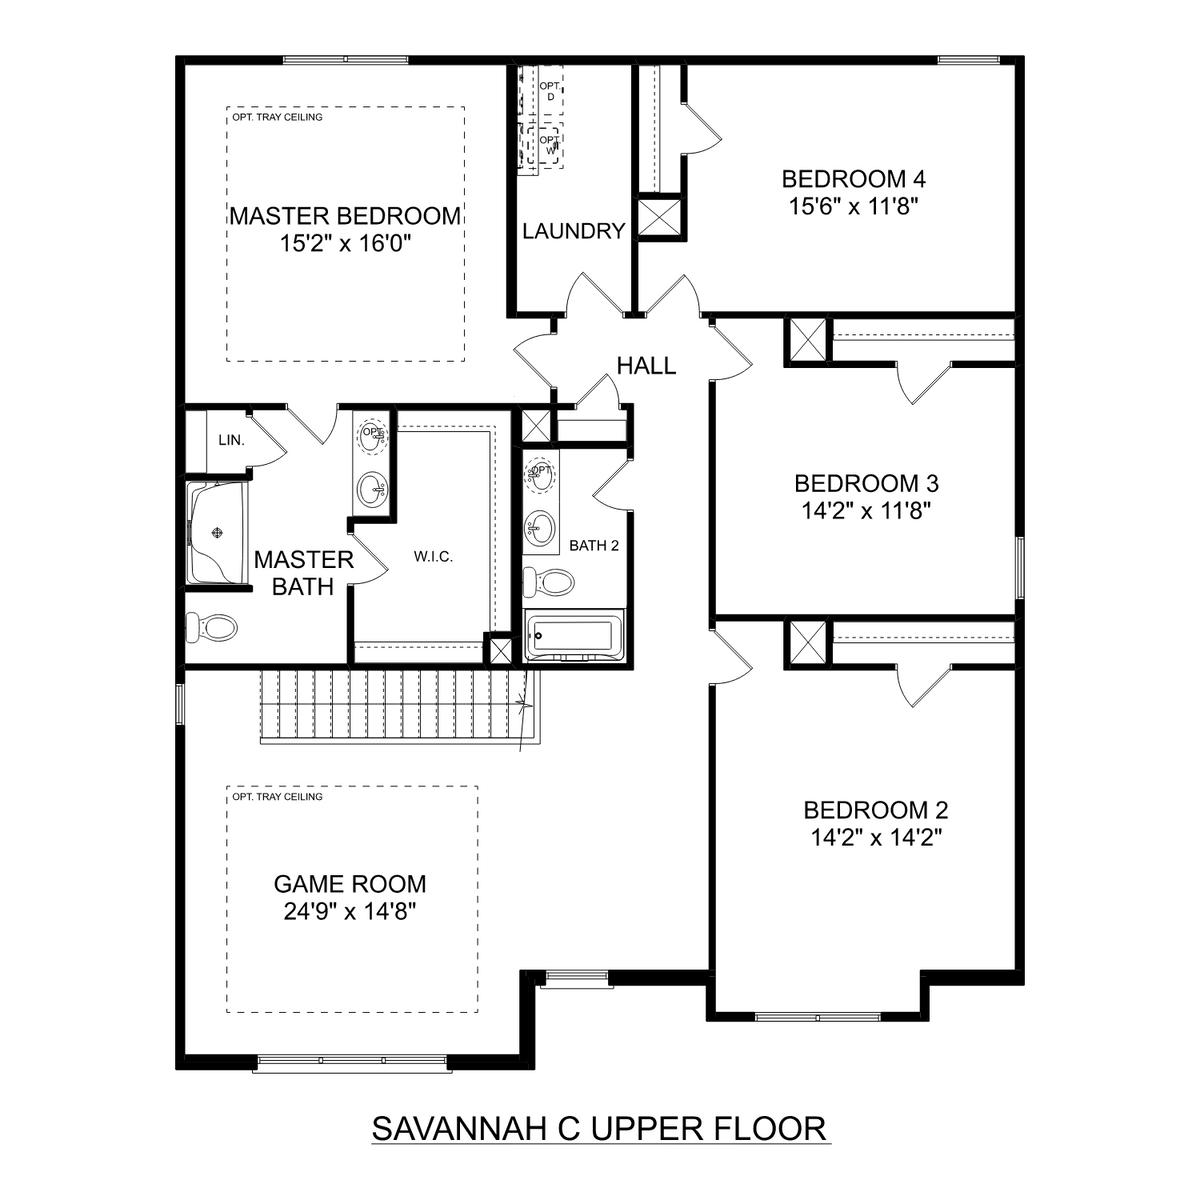 2 - The Savannah C floor plan layout for 2150 Mcafee Road in Davidson Homes' The Reserve at North Ridge community.